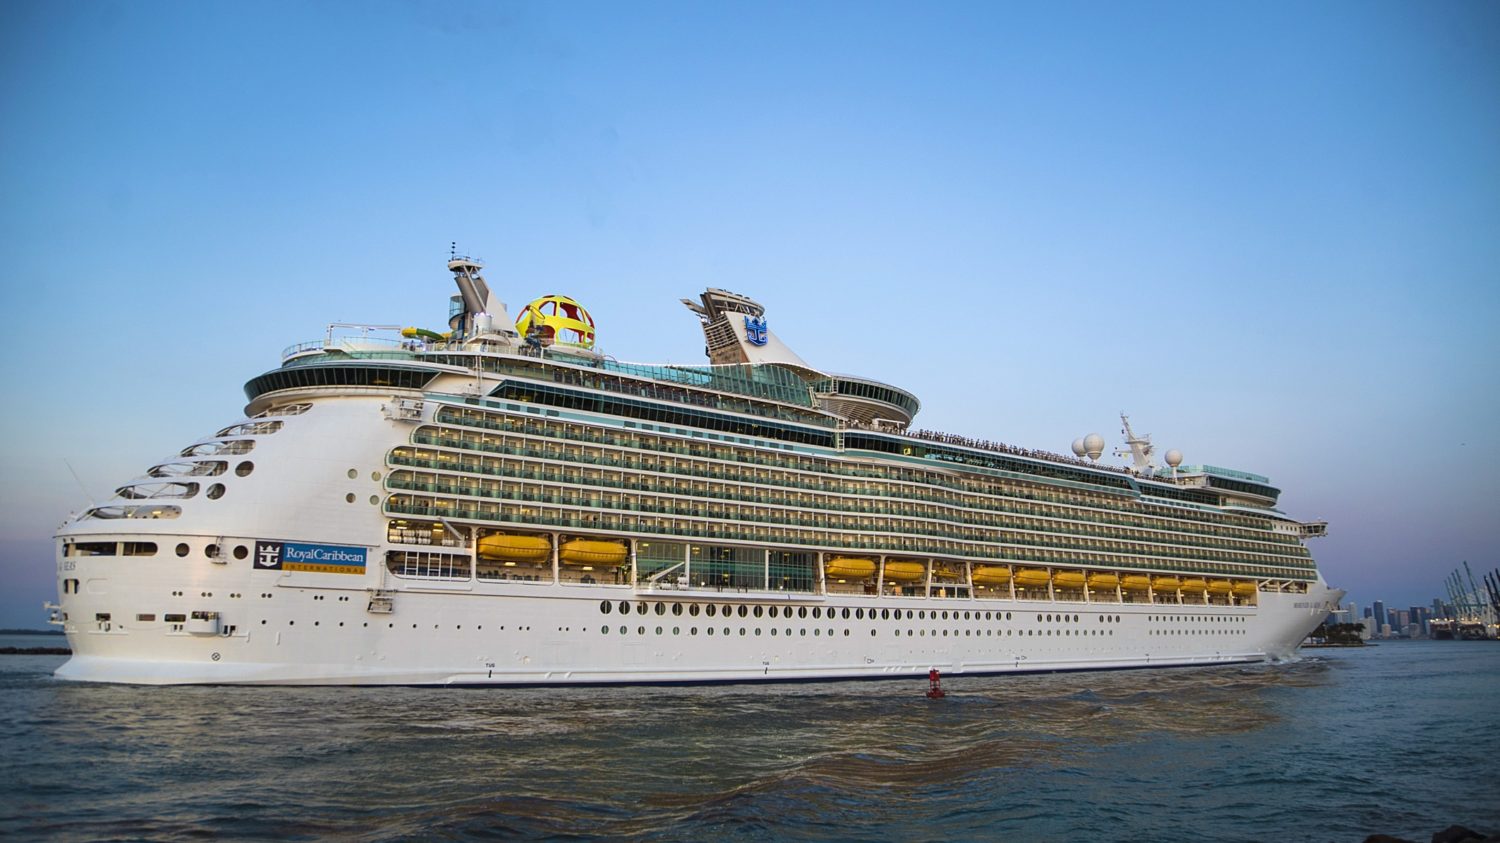 Royal Caribbean Cruise Ship in Miami After $120 Million Makeover